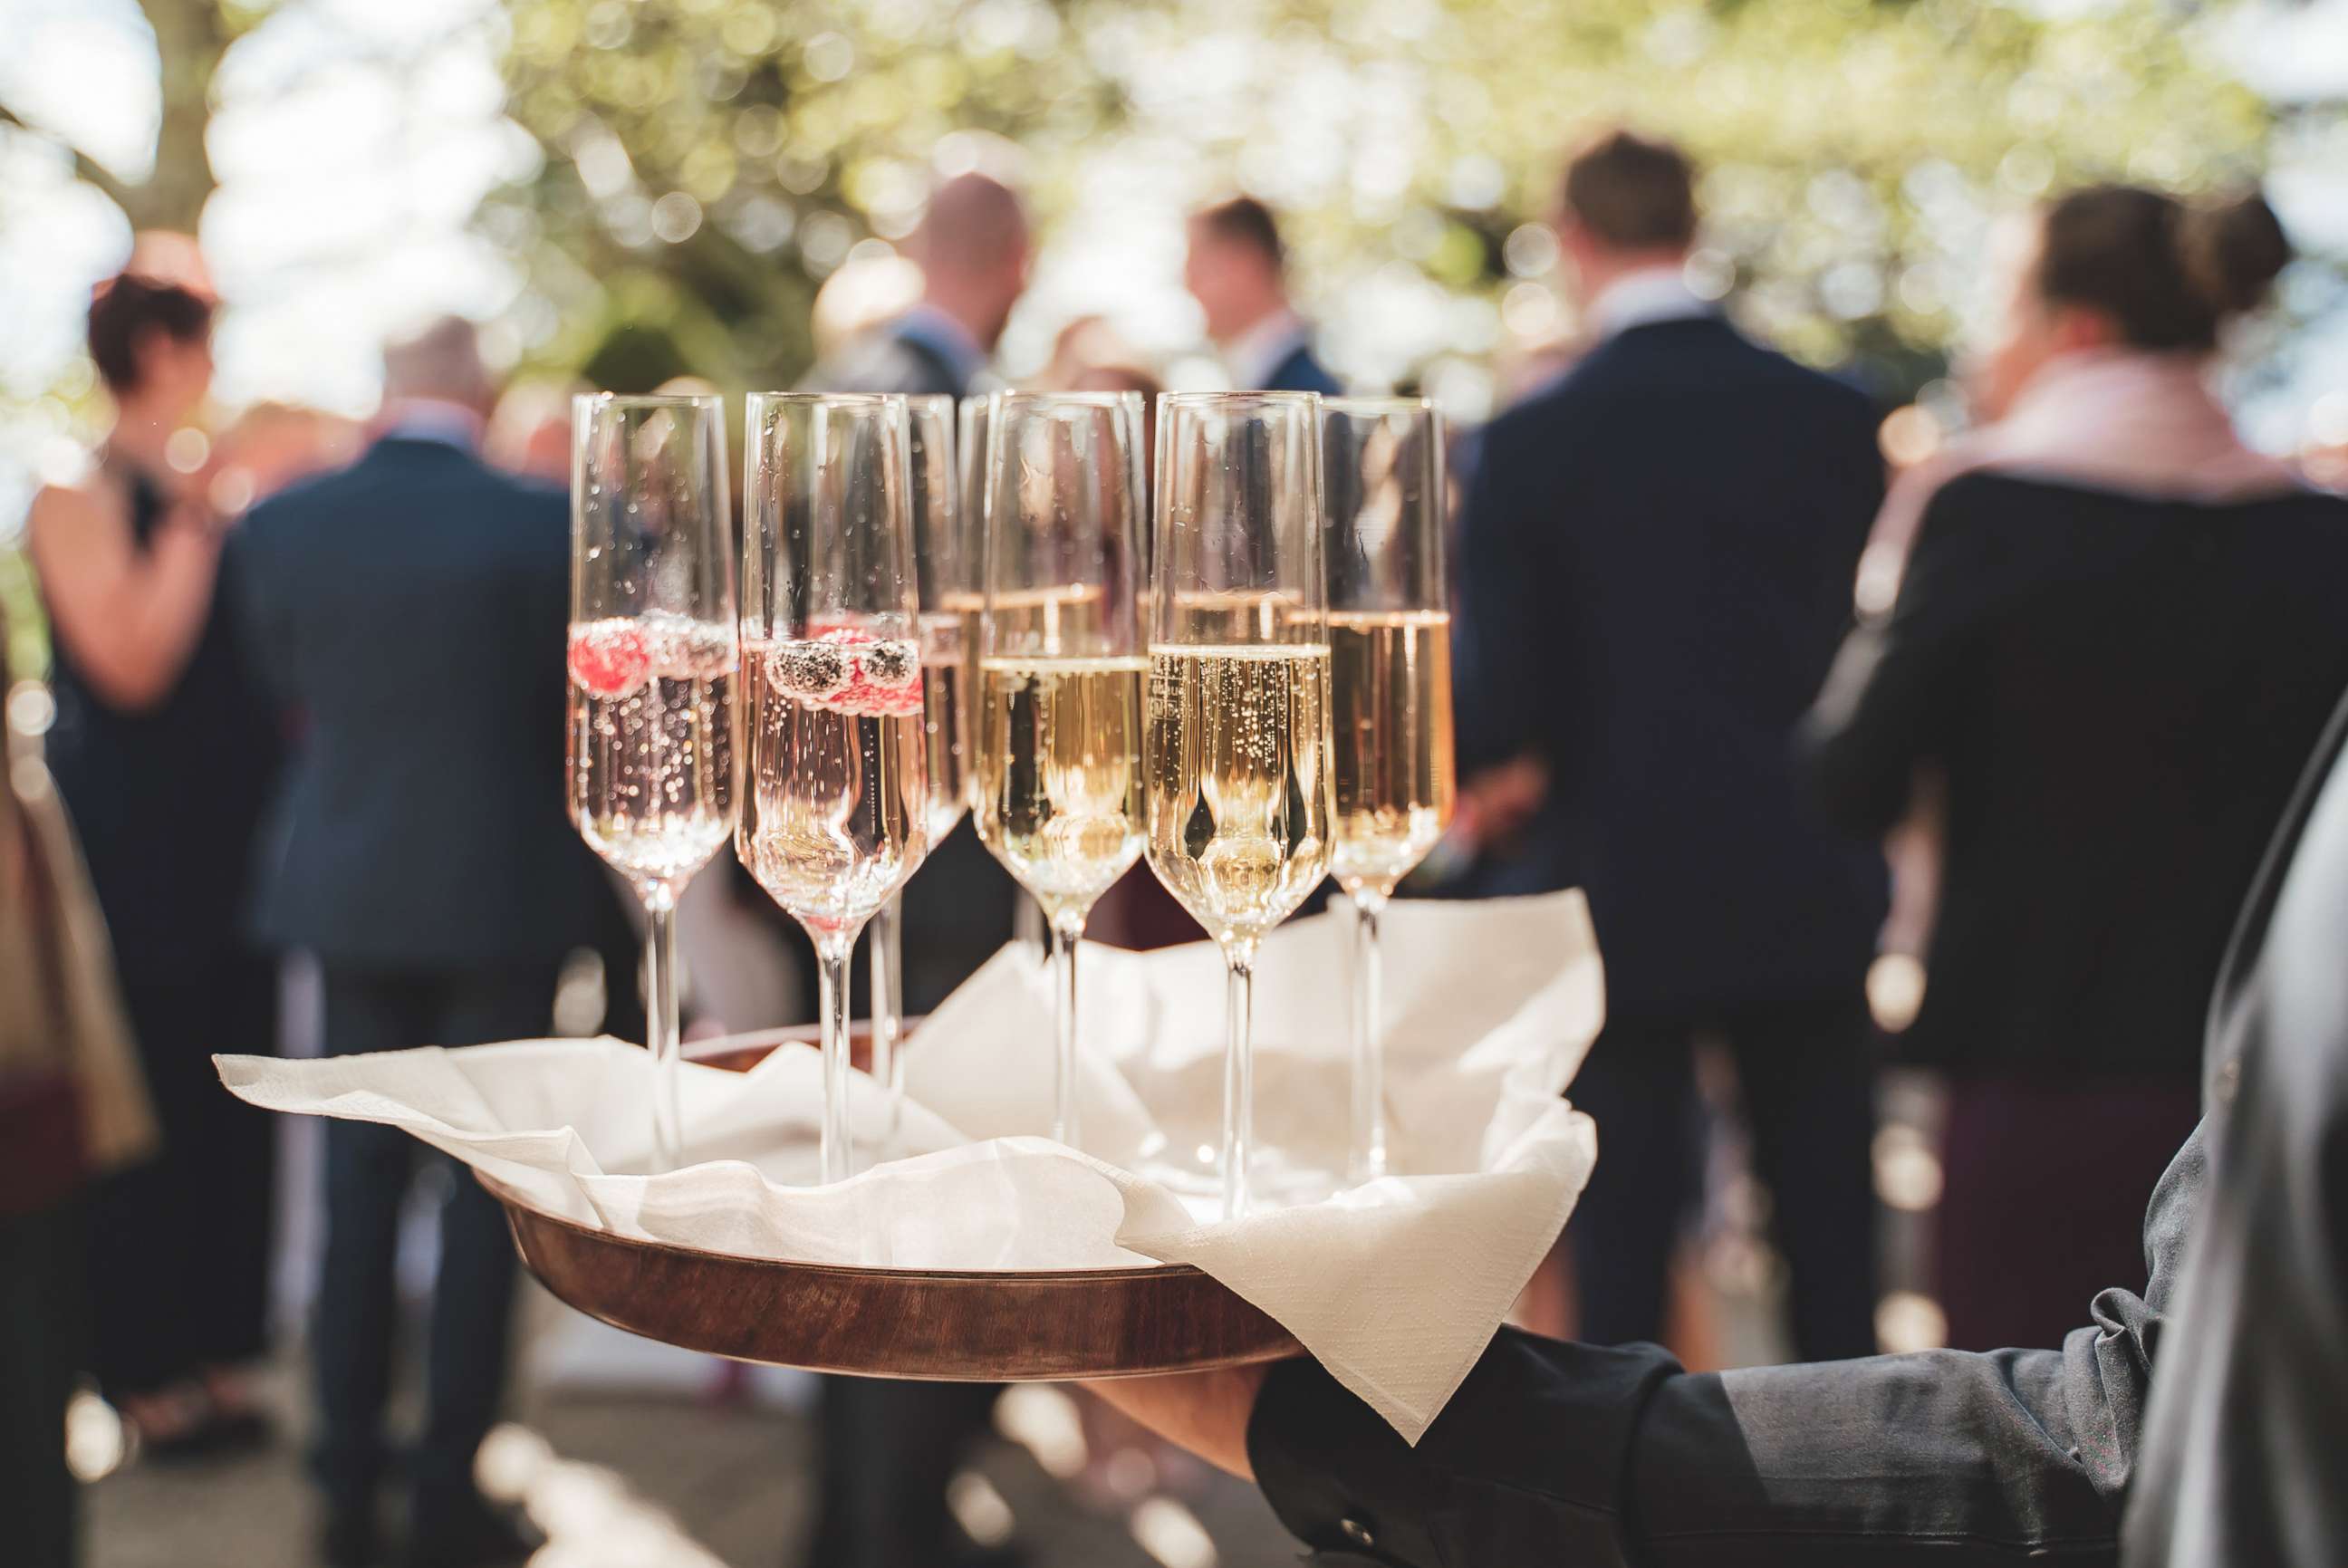 PHOTO: Beverages are served at a wedding in this stock photo.